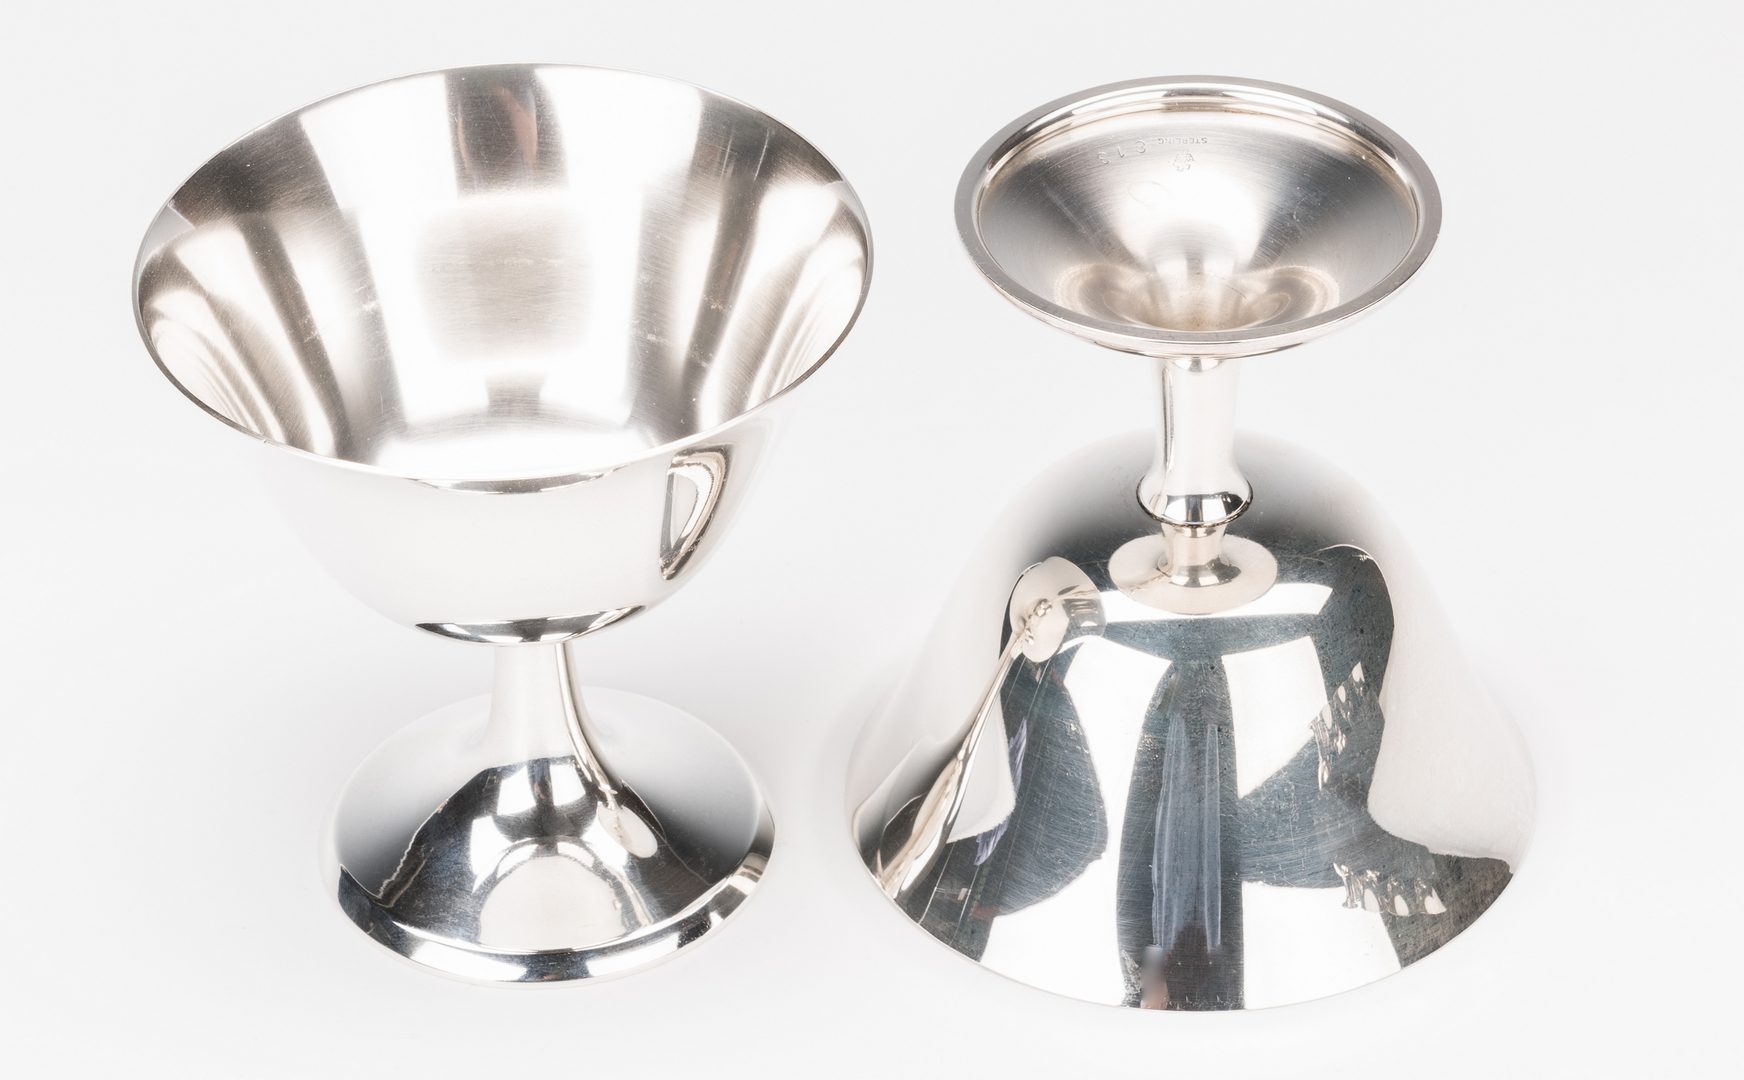 Lot 586: 10 Manchester Sterling Champagne or Sherbets